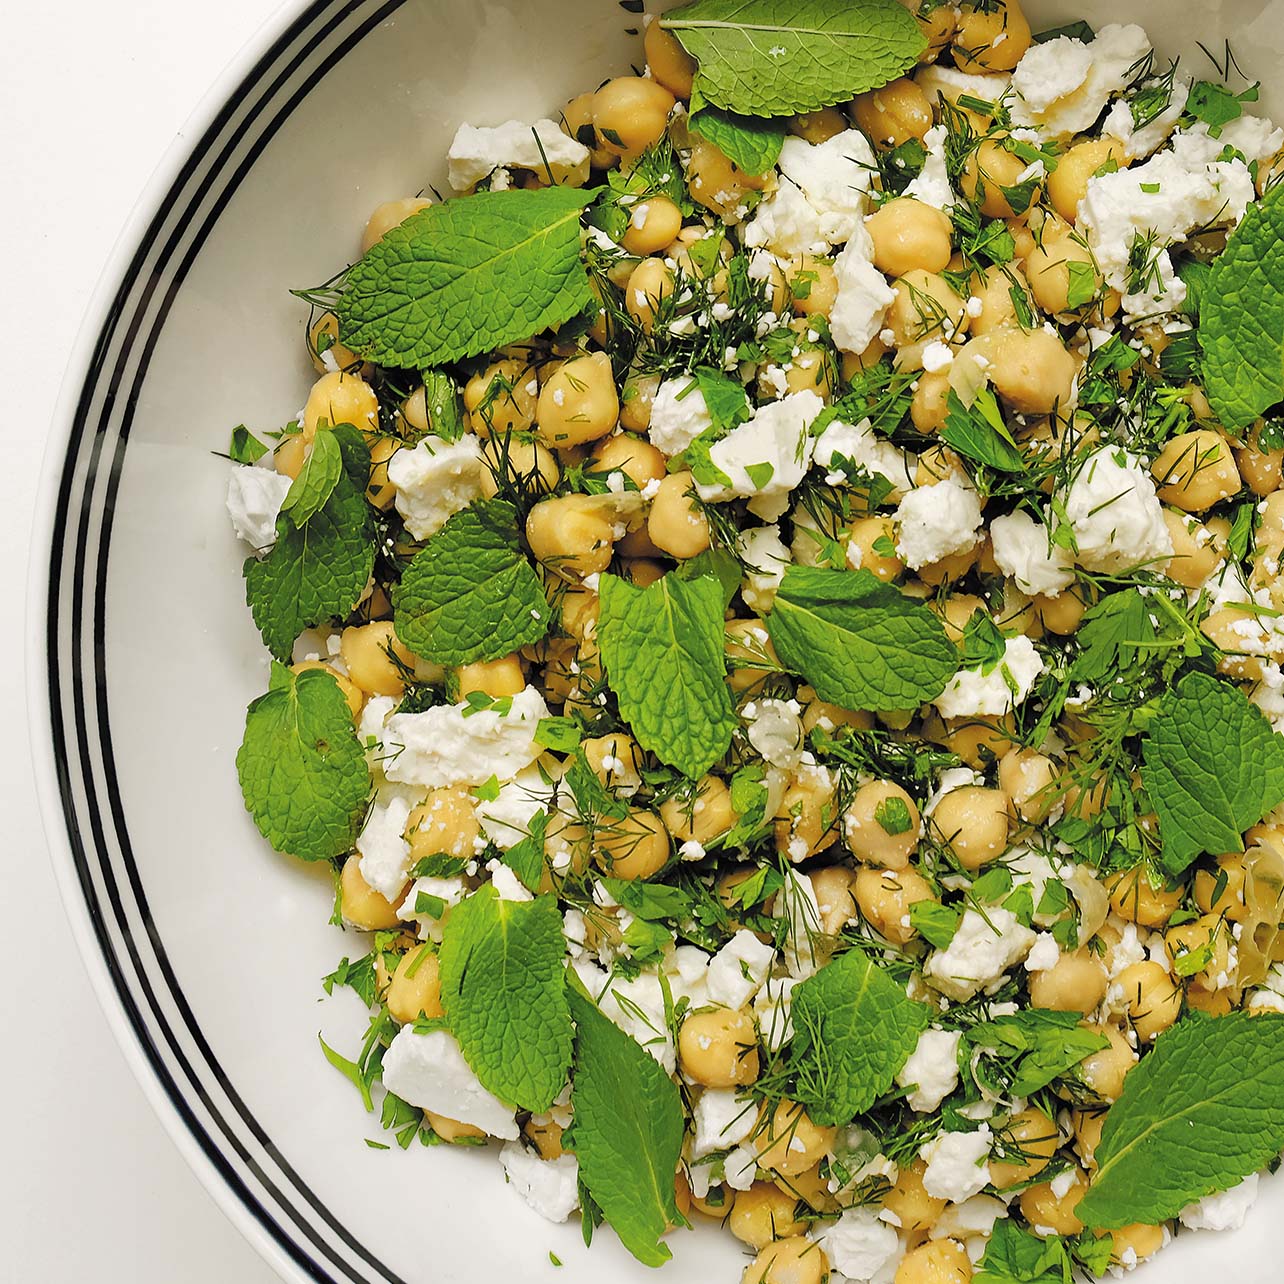 Aerial photo of a chickpea salad with feta cheese and an herb garnish